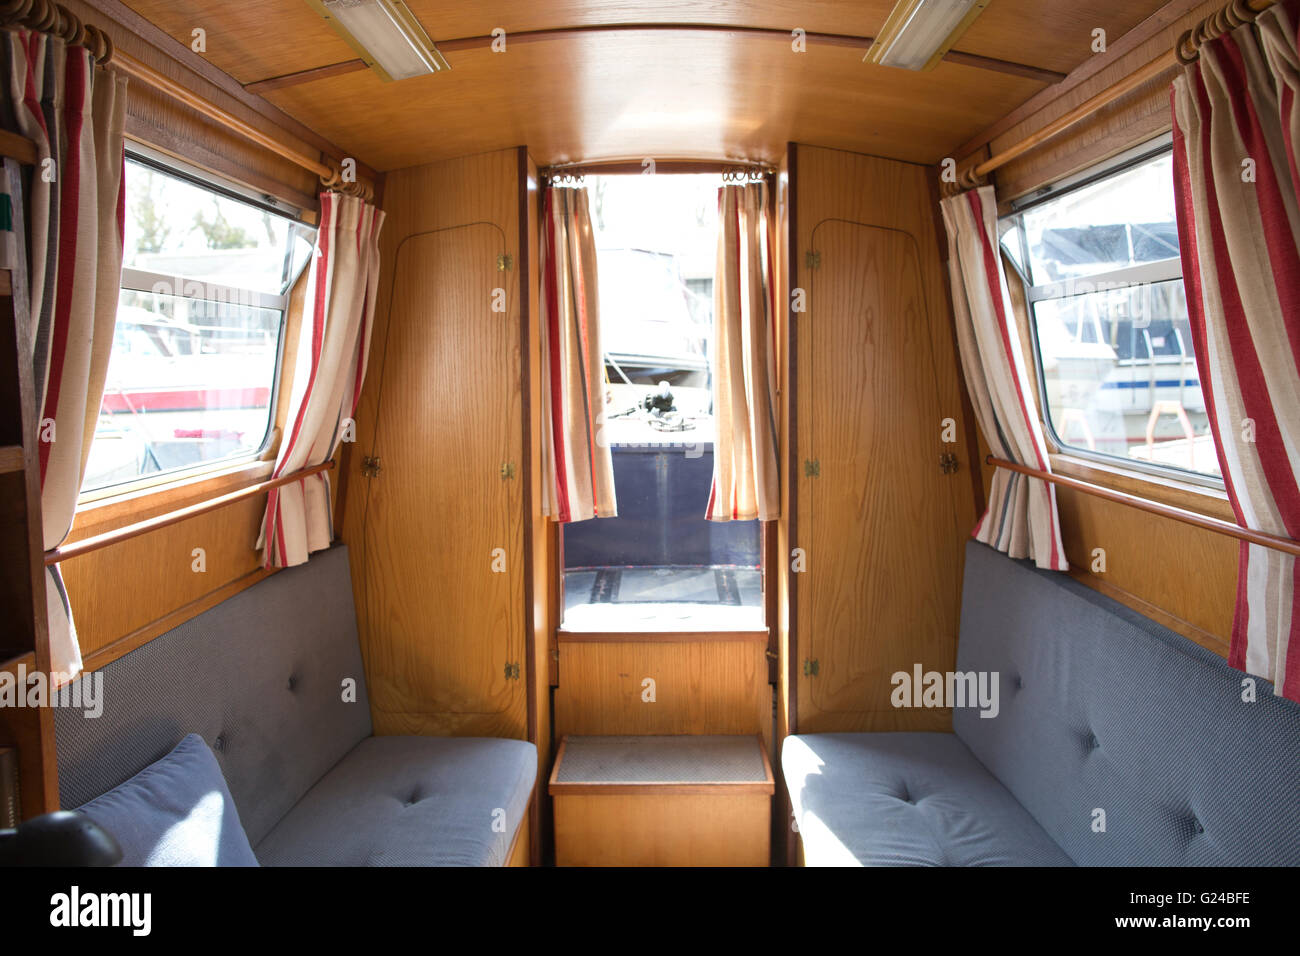 Interior of a canal boat moored at Brentford Dock Marina, West London, situated on the River Thames, England, UK Stock Photo